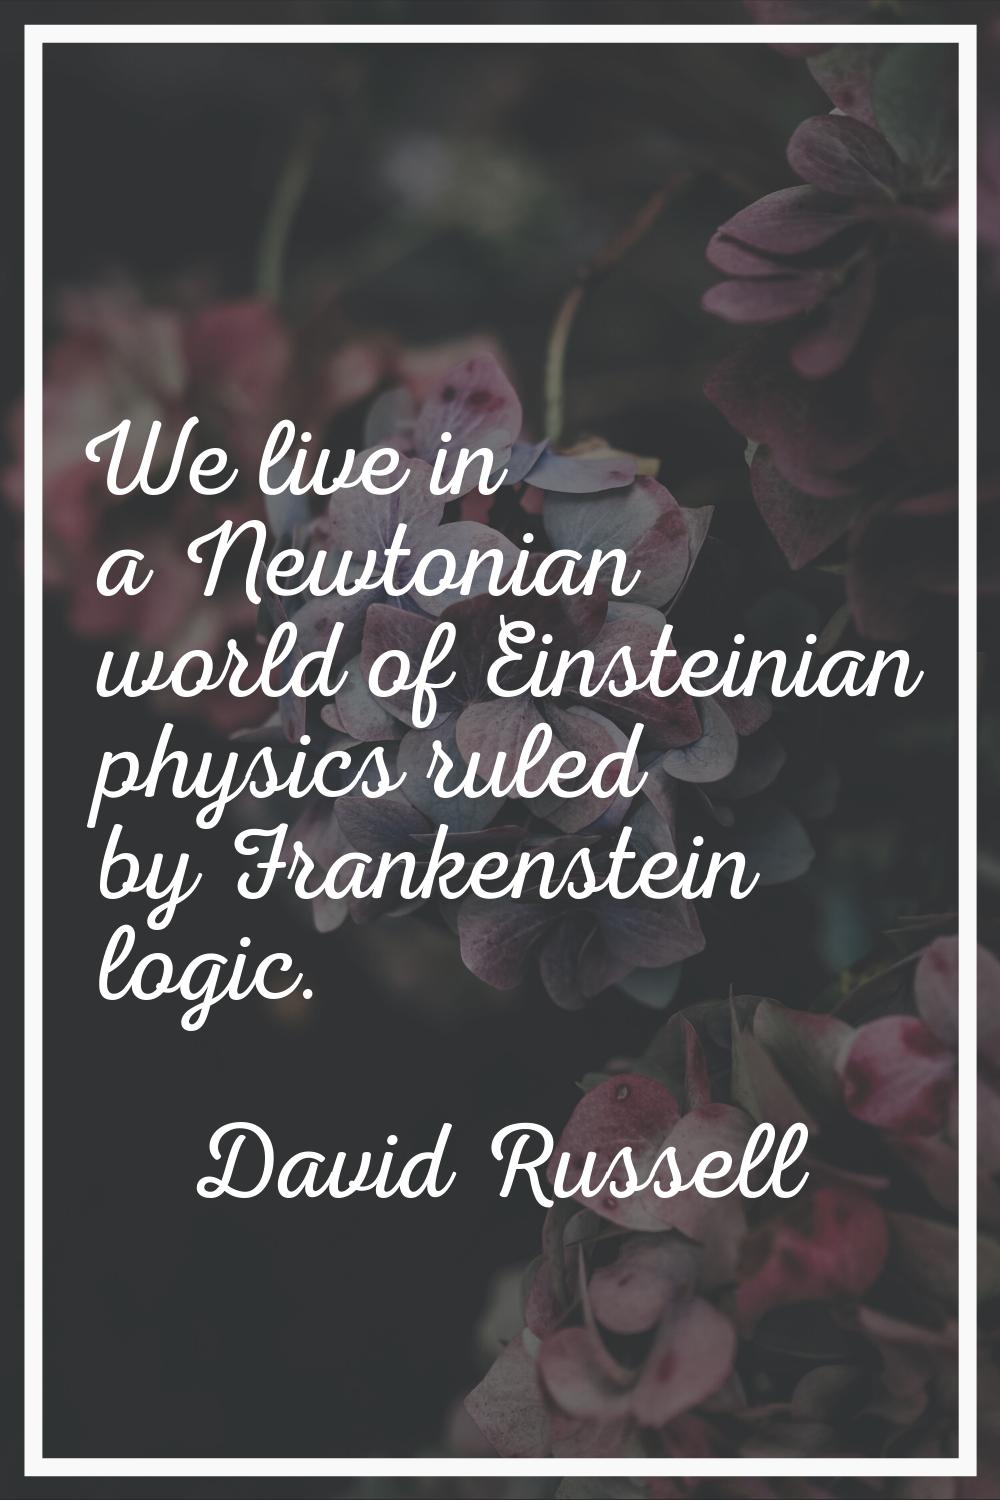 We live in a Newtonian world of Einsteinian physics ruled by Frankenstein logic.